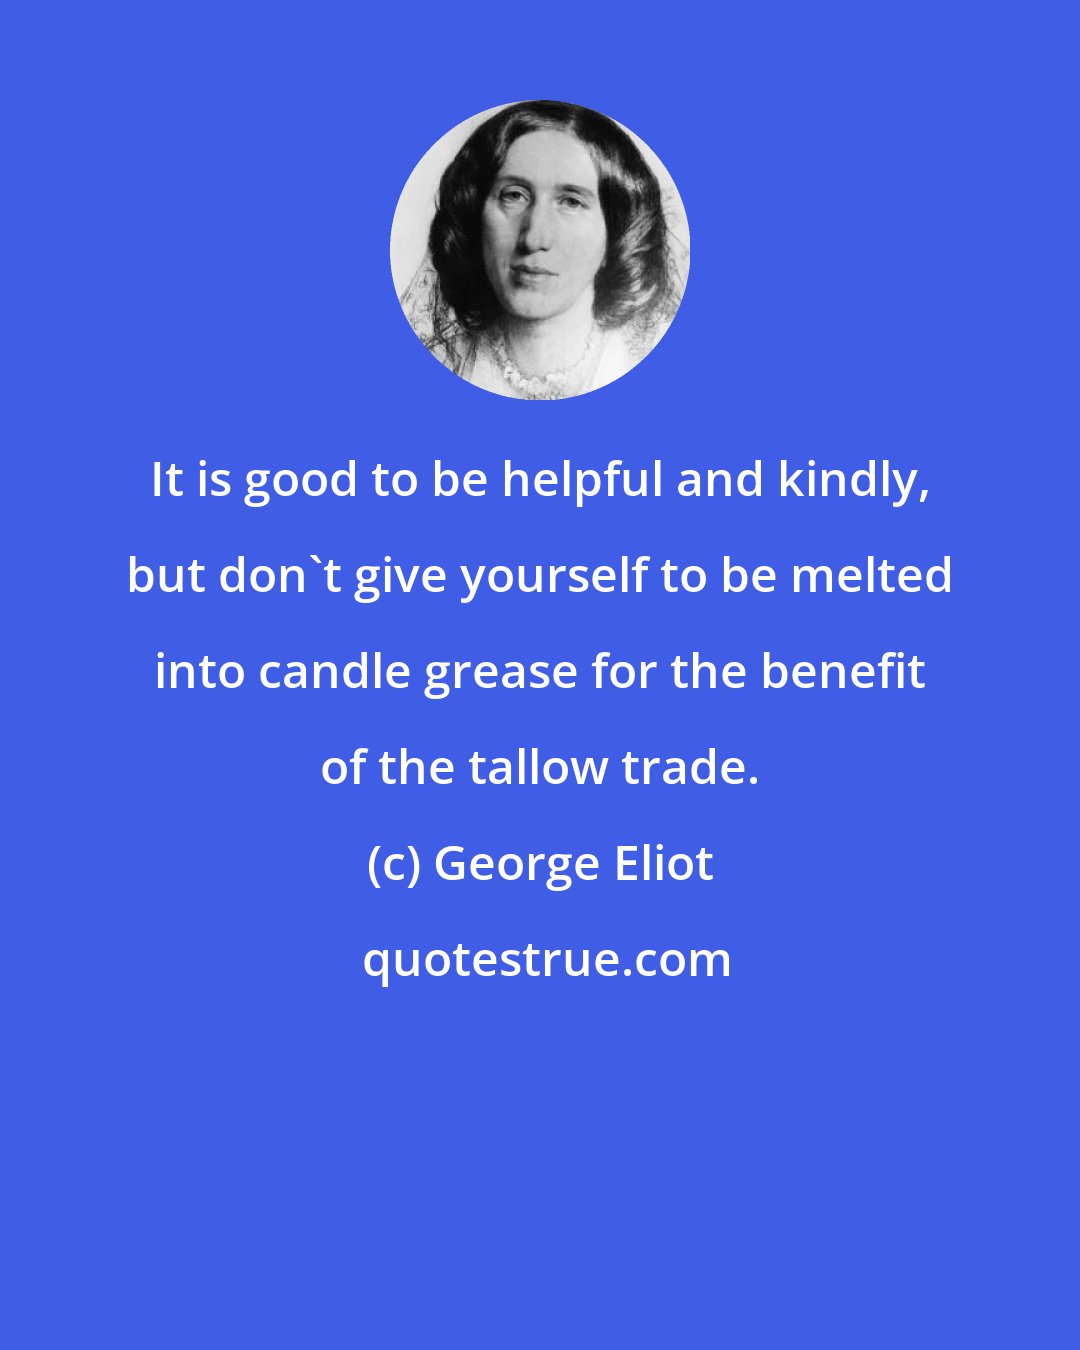 George Eliot: It is good to be helpful and kindly, but don't give yourself to be melted into candle grease for the benefit of the tallow trade.